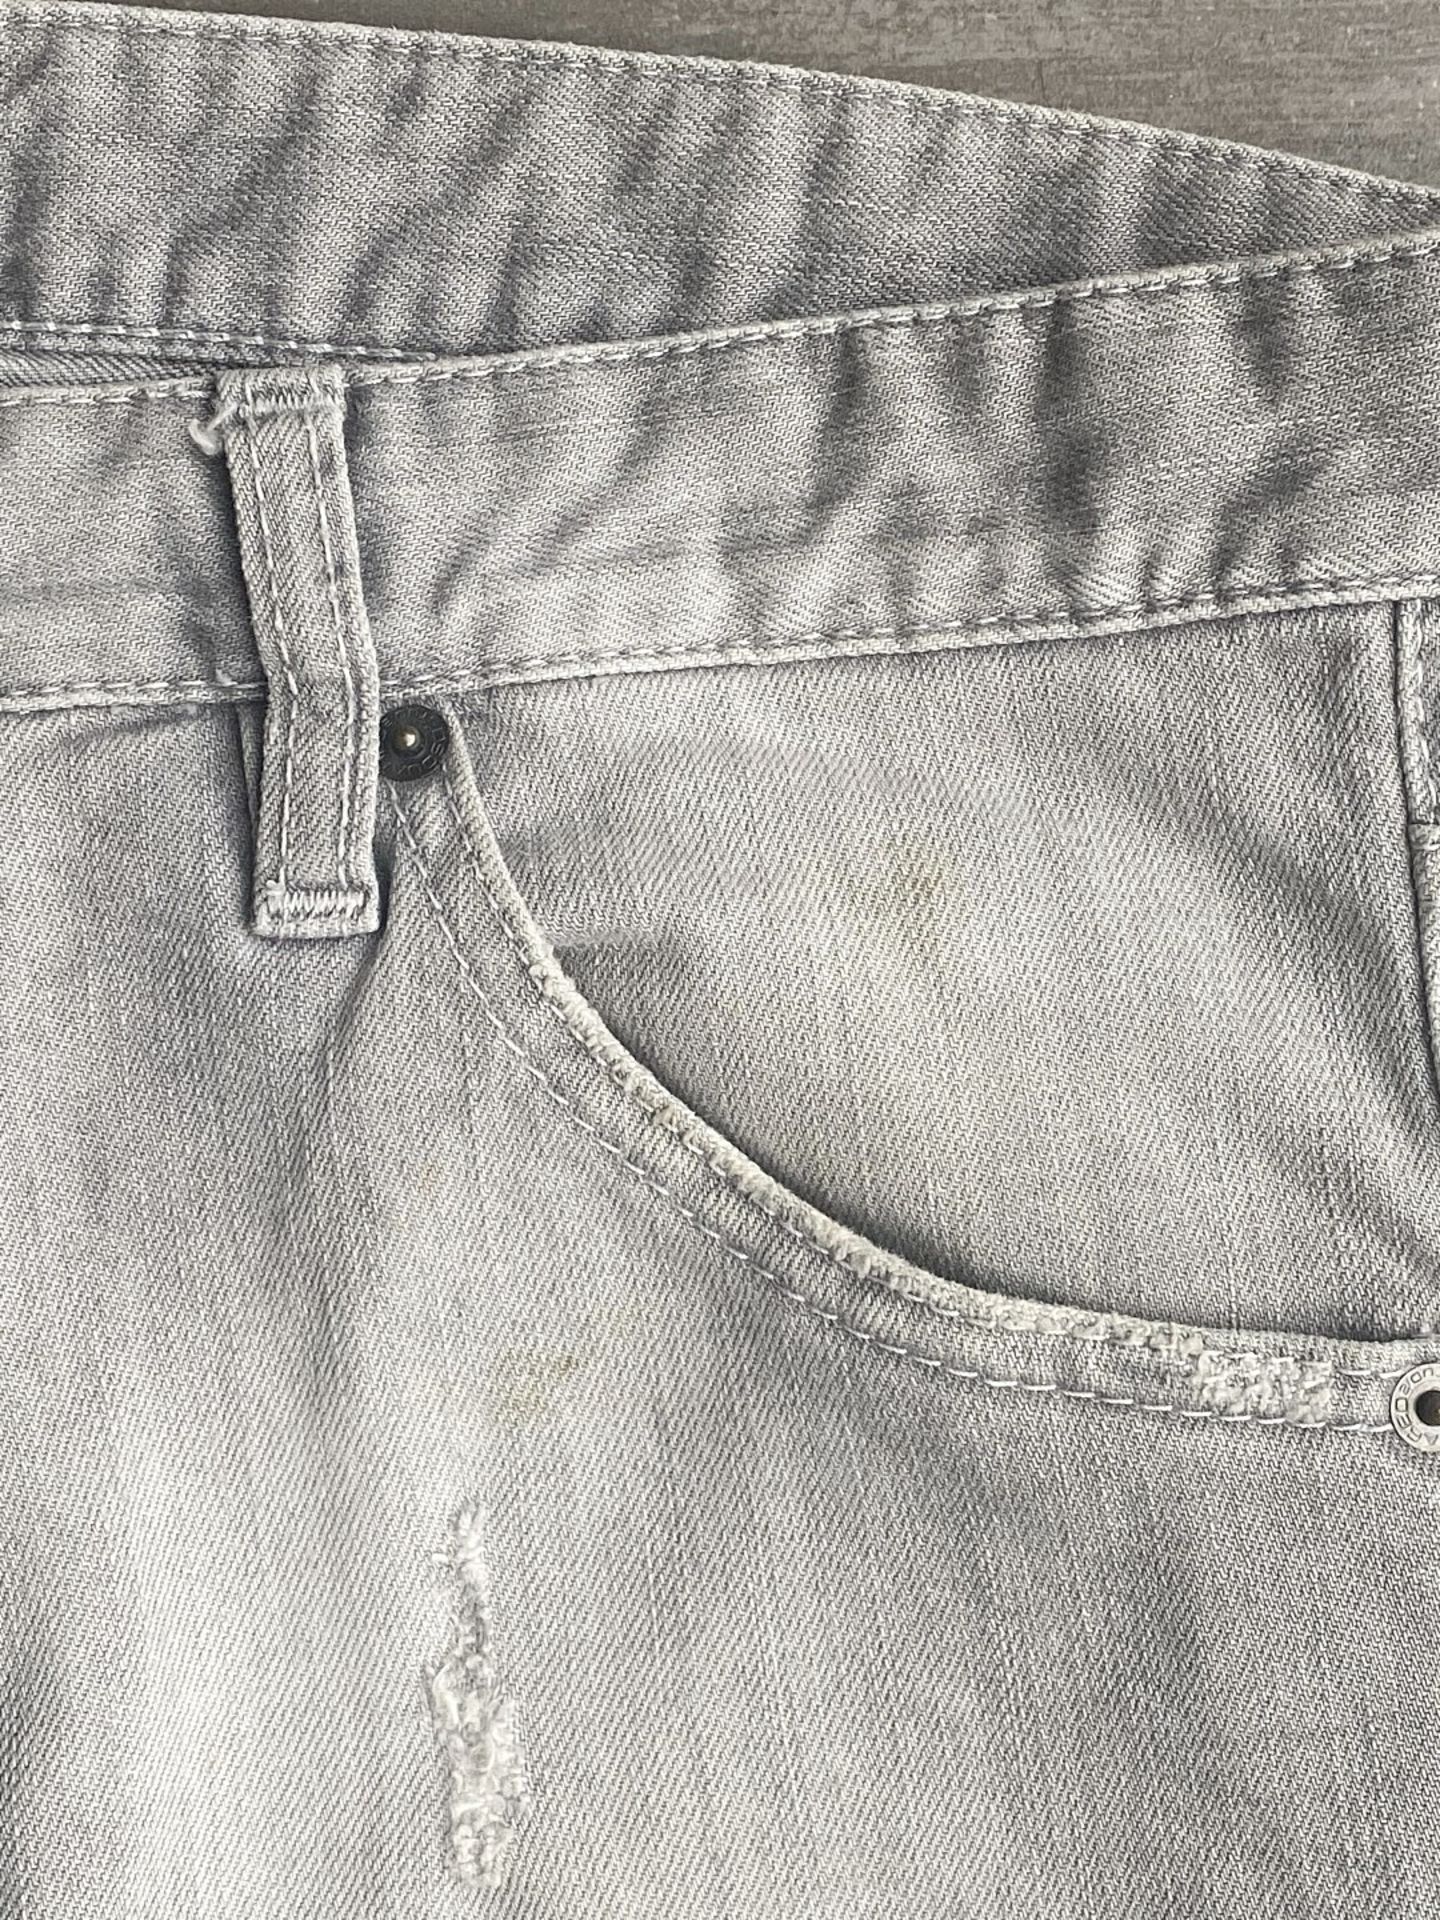 1 x Pair Of Men's Genuine Dsquared2 Designer Jeans In Grey - Waist Size: UK 32 / Italy 48 - Image 2 of 8